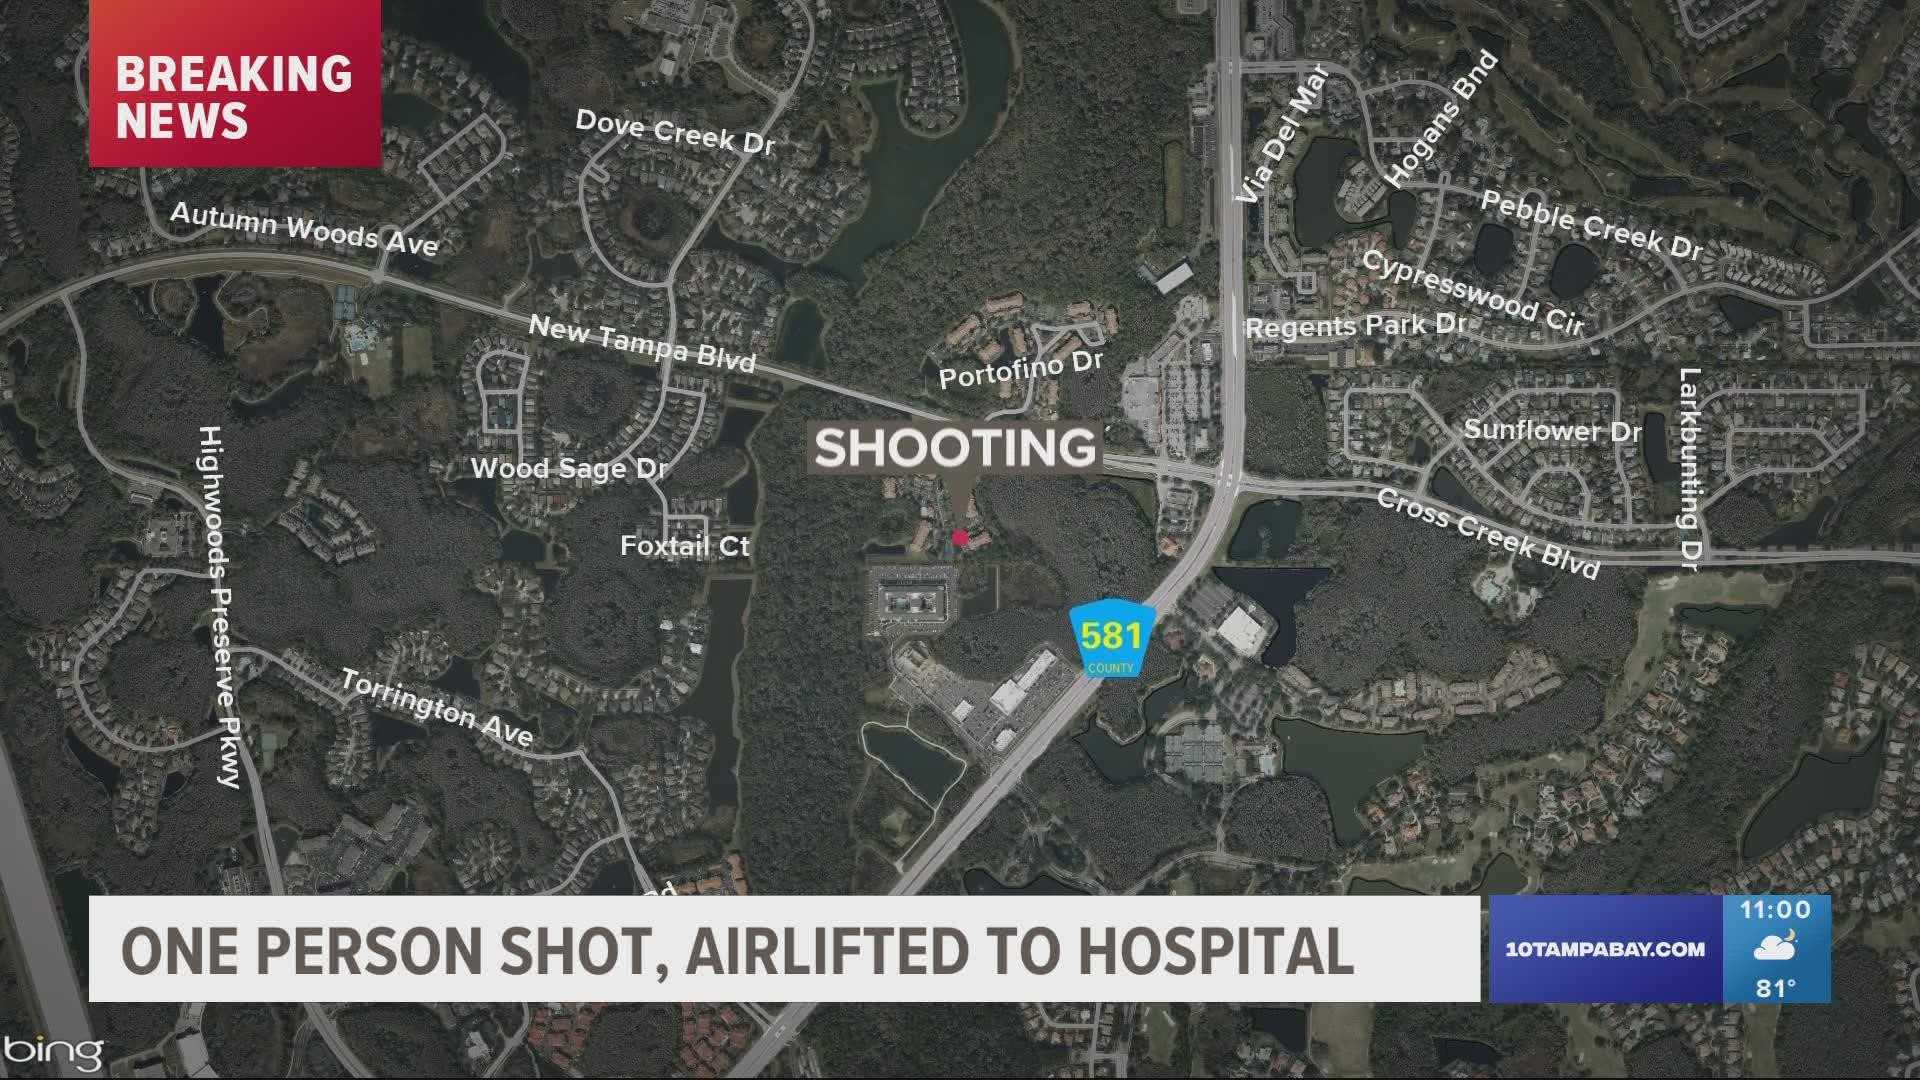 Tampa police officers responded to a shooting at around 9:30 p.m.